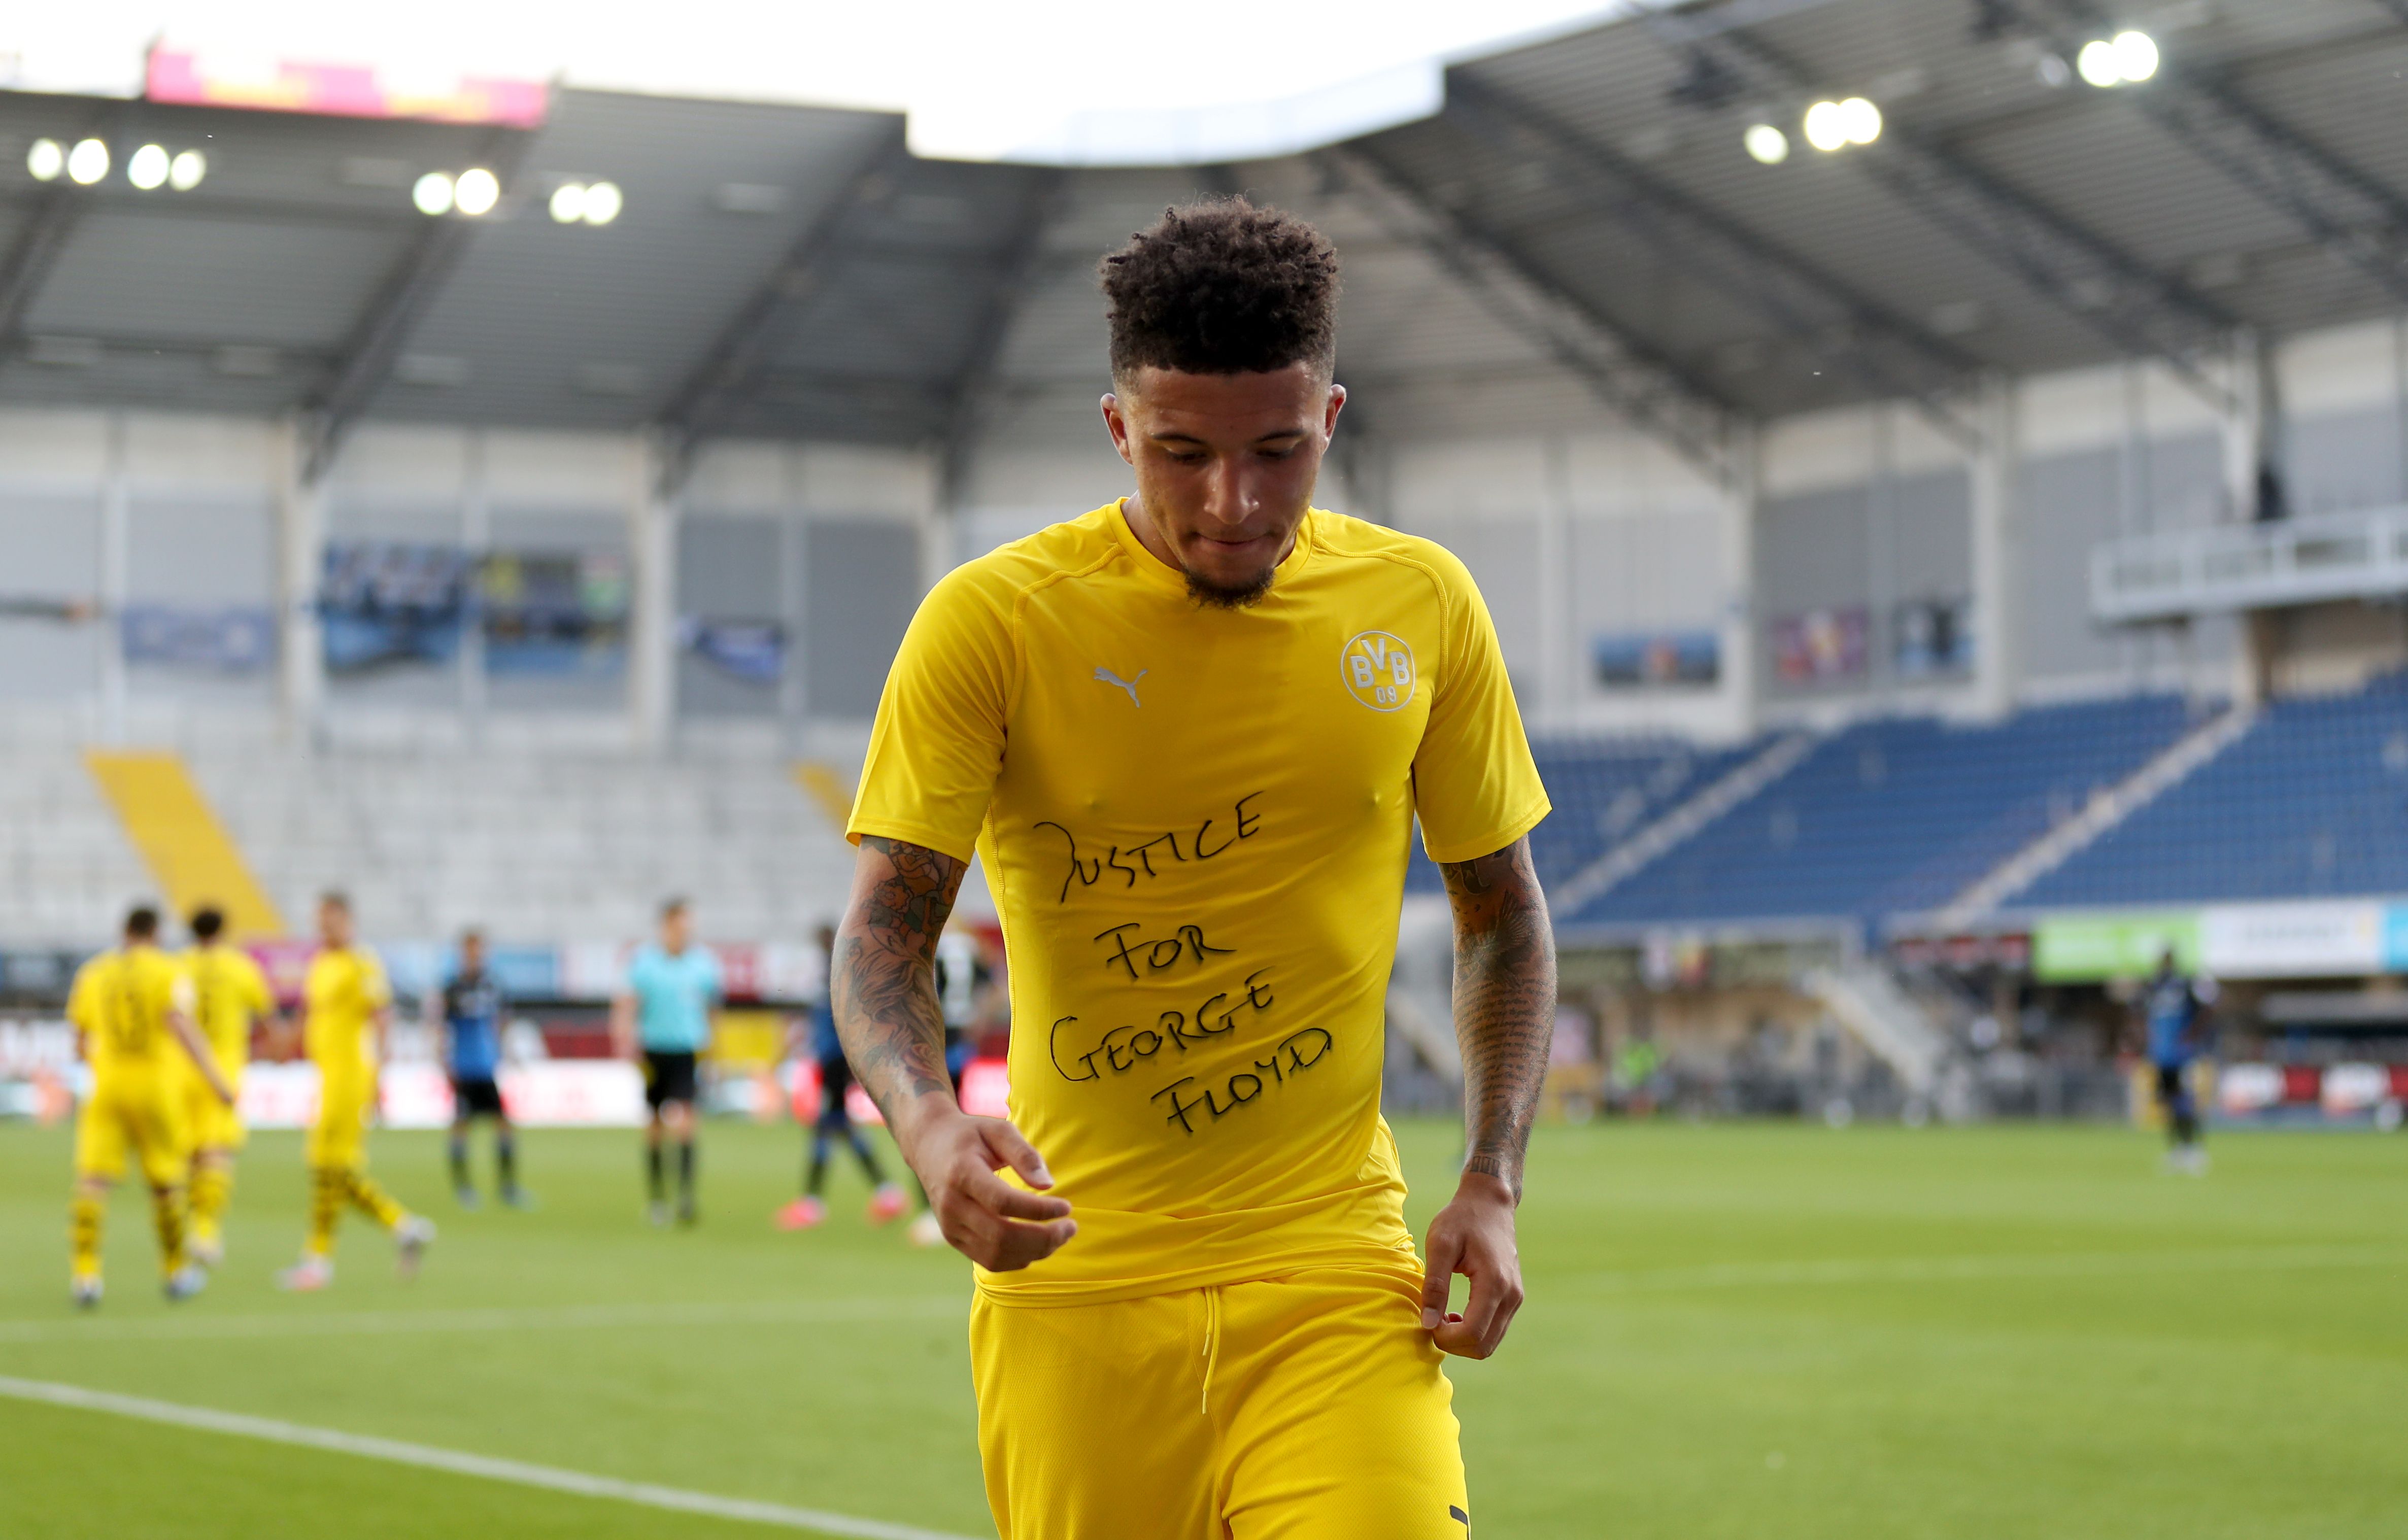 Soccer player with "Justice for George Floyd" written on his shirt